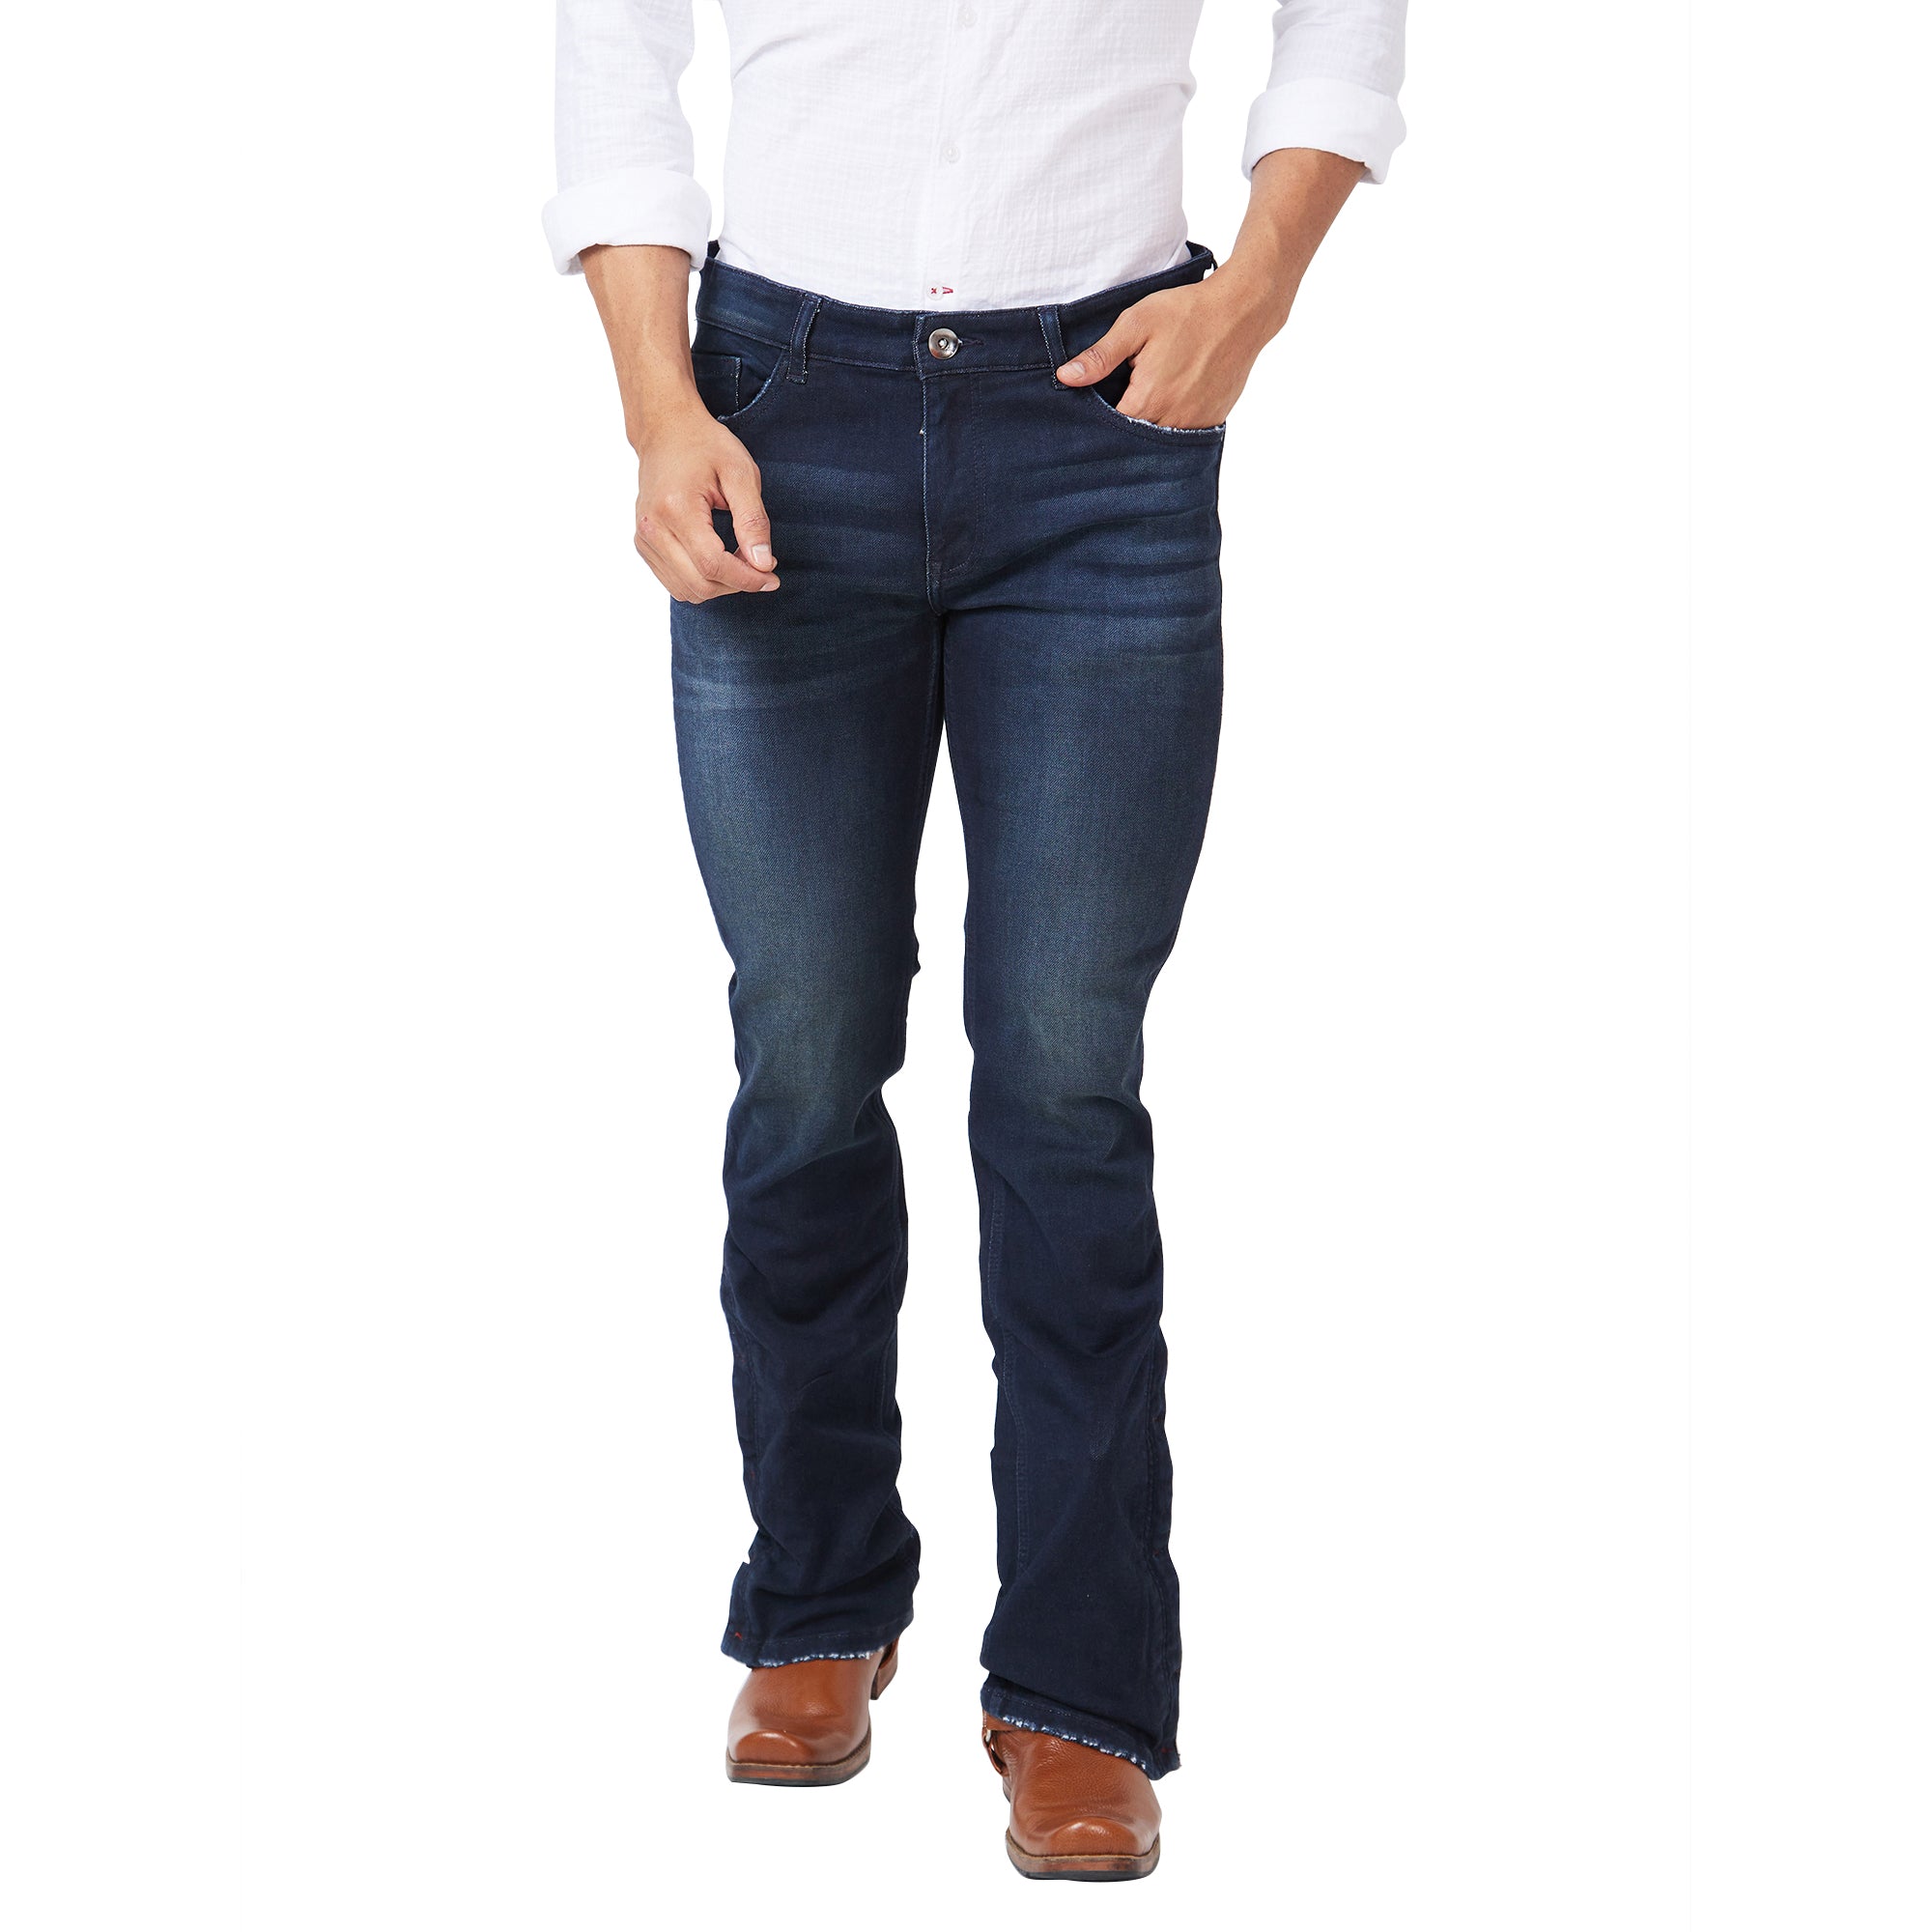 Mens Flared Bell Bottom Pants Business Smart Casual Bootcut Trousers Slim  Fitted Plain  Wish